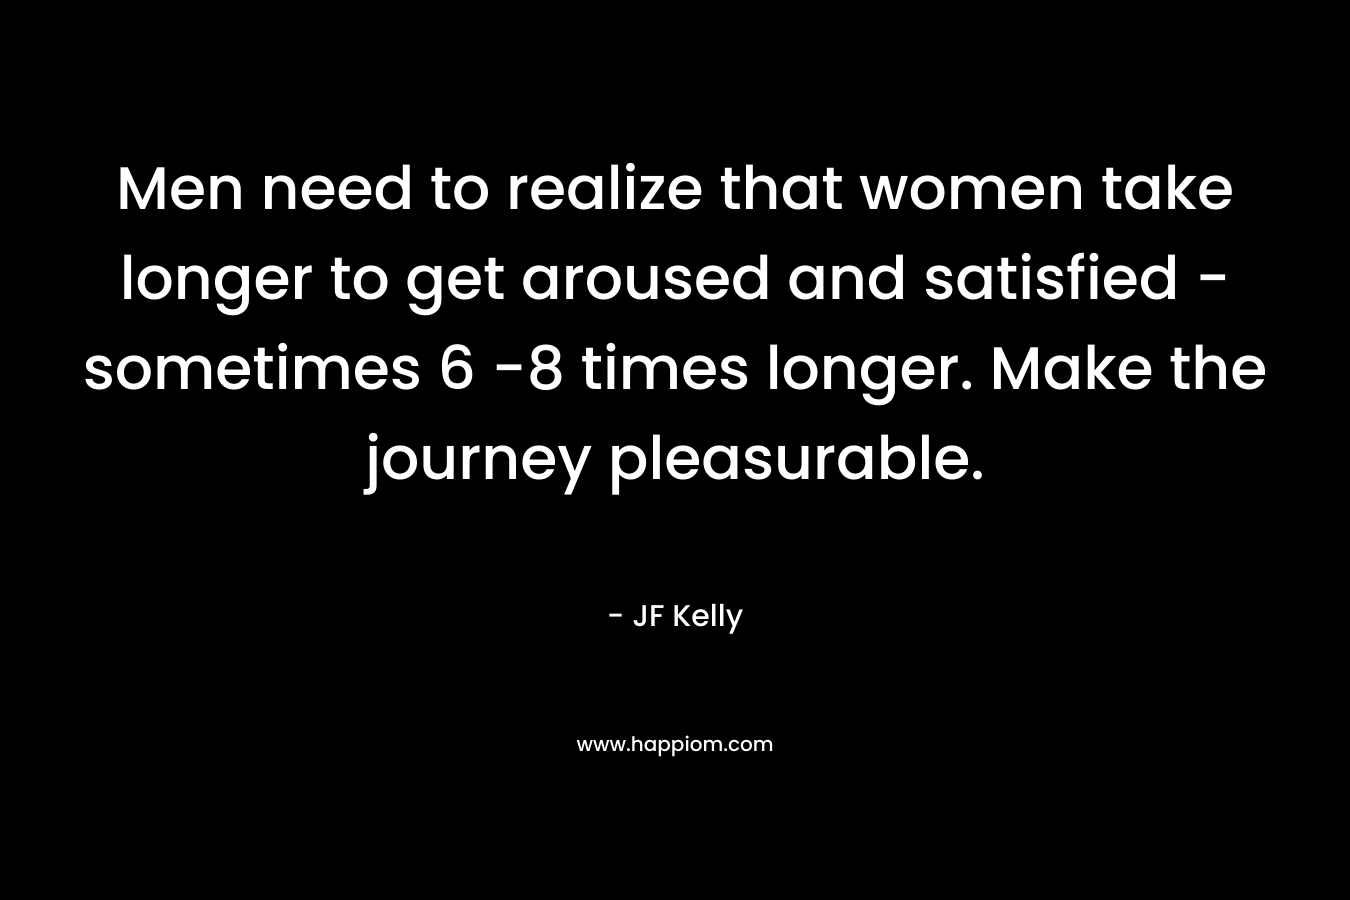 Men need to realize that women take longer to get aroused and satisfied – sometimes 6 -8 times longer. Make the journey pleasurable. – JF Kelly